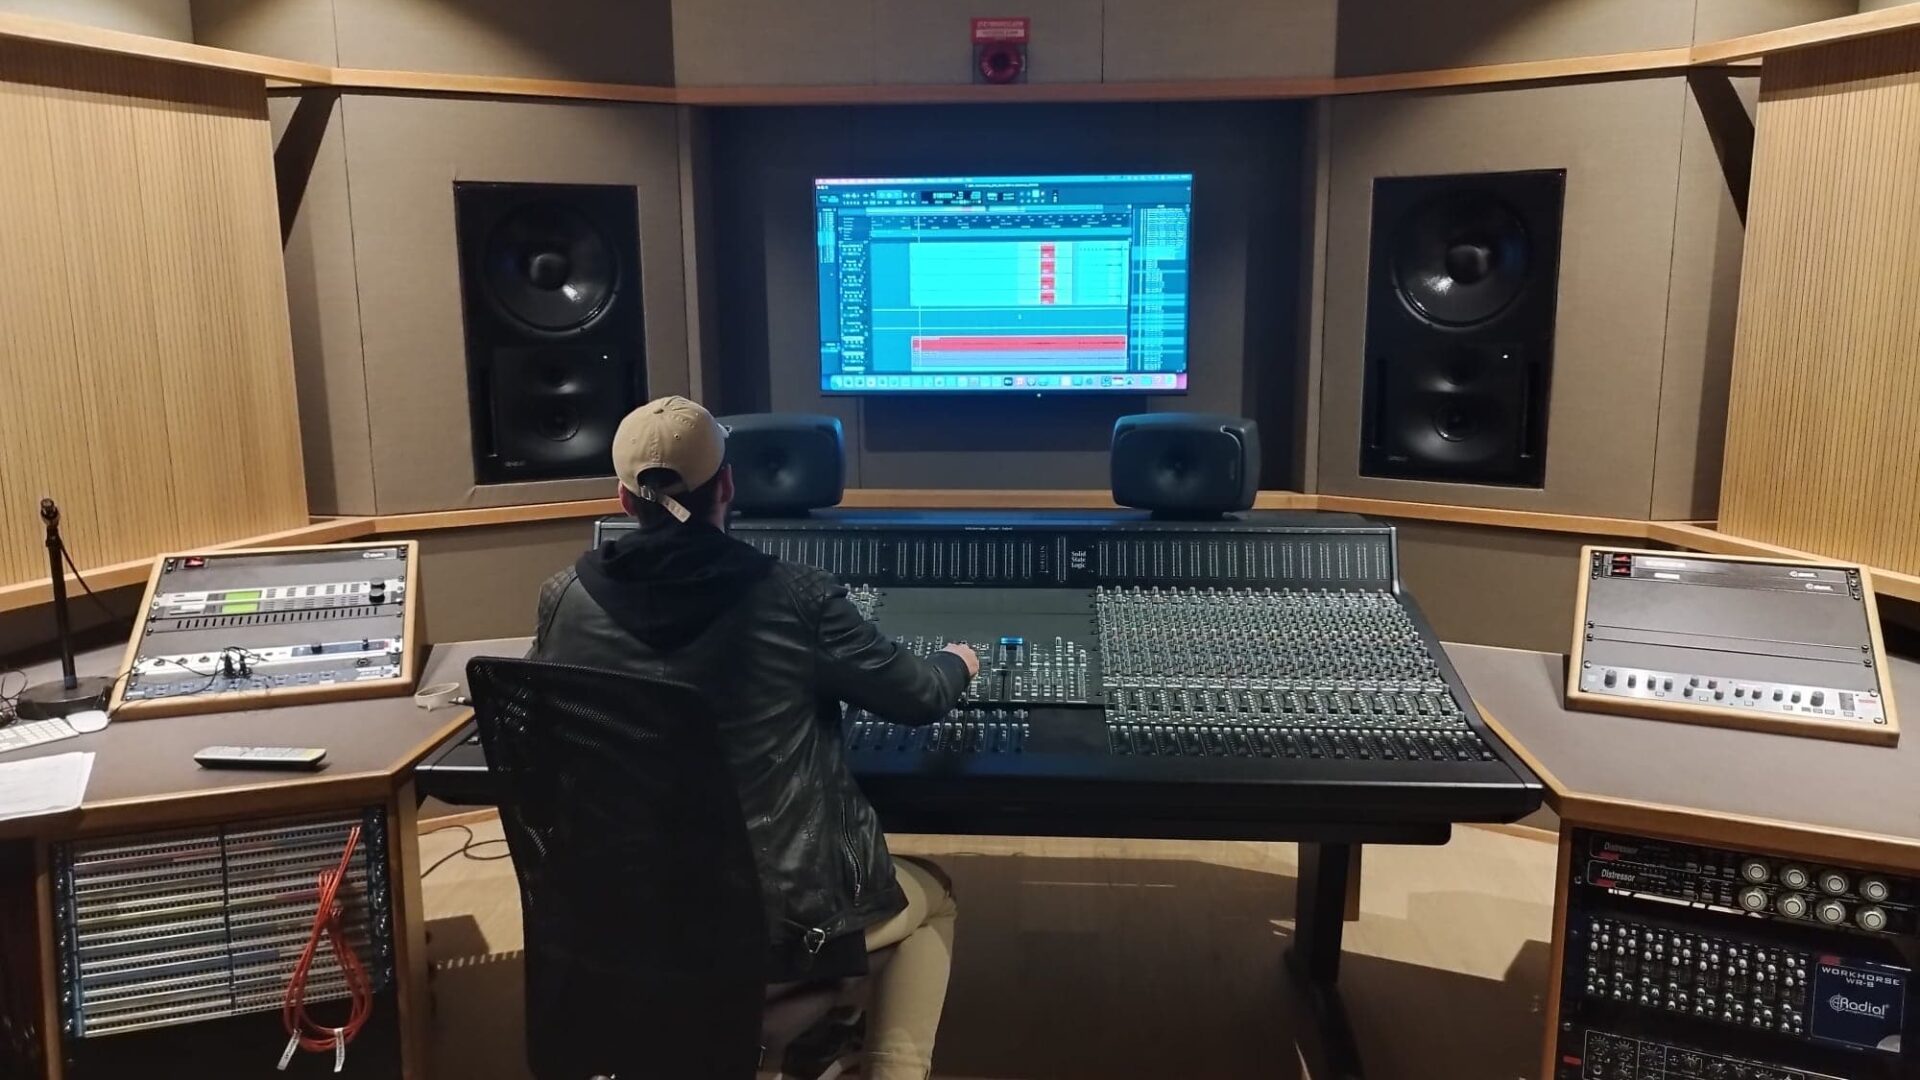 A person sits at a desk in a music studio, surrounded by recording equipment. They are focused on their work, with studio monitors on and a computer screen in front of them.